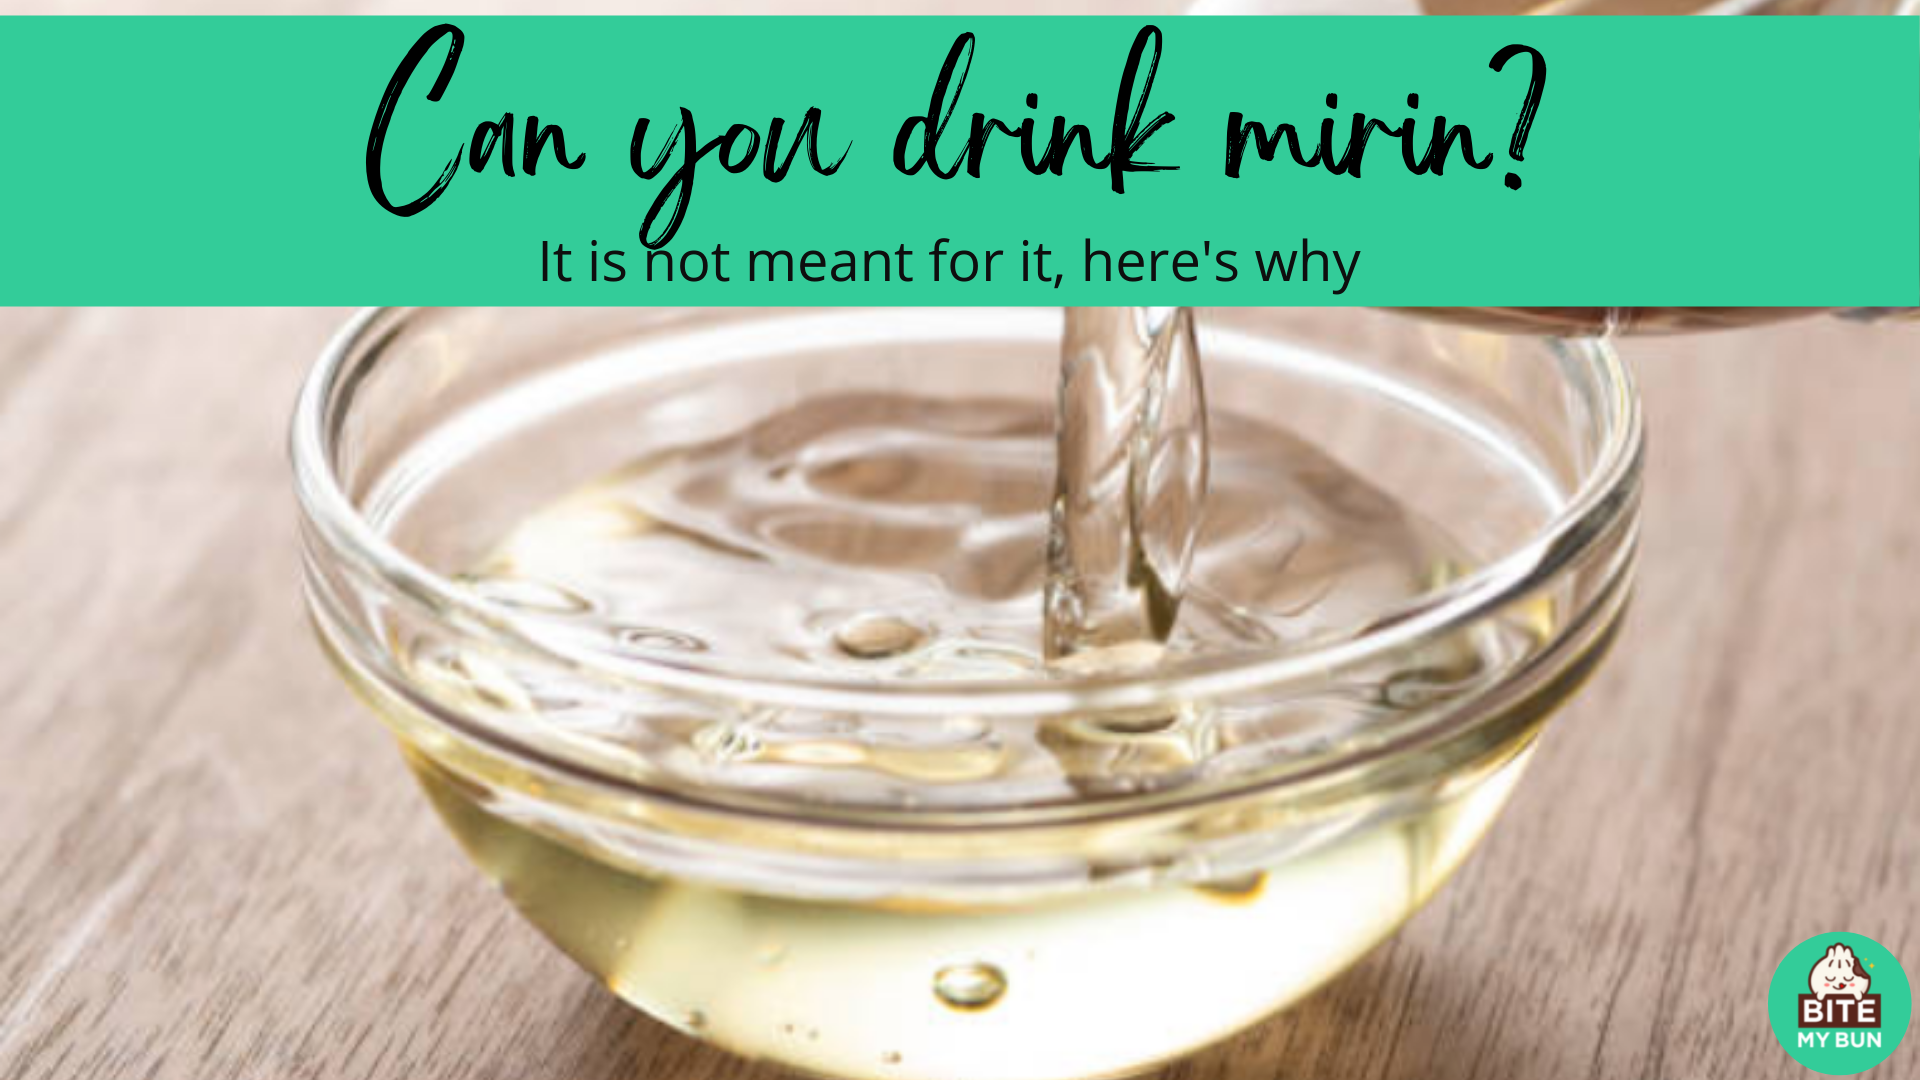 Can you drink mirin? It is not meant for it, here's why